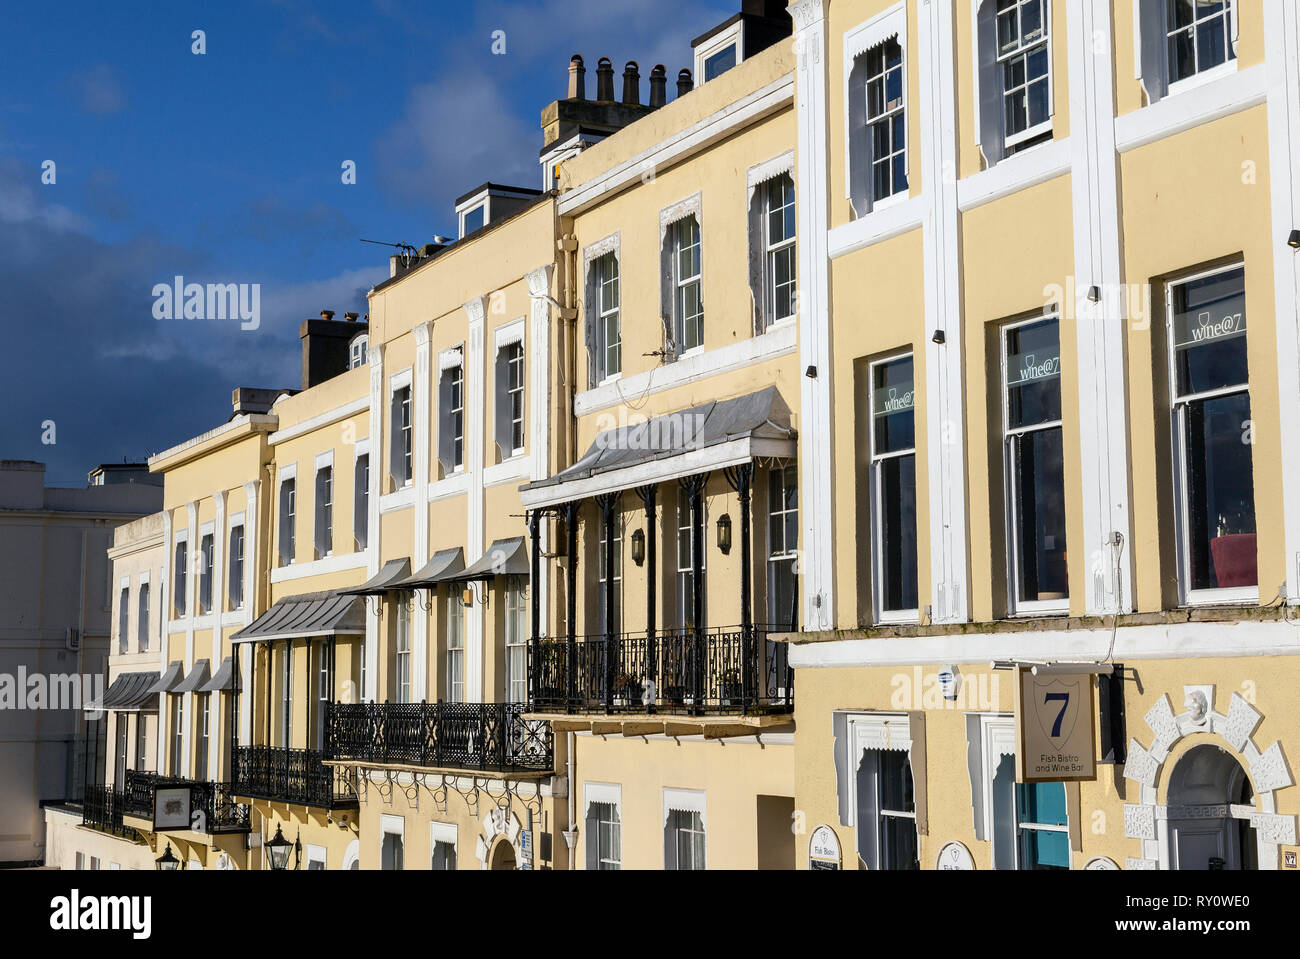 Nos.1-7 BEACON TERRACE. Terrace of 7 houses. 1833 by Jacob Harvey.  Space, Horizontal, Inside Of, Nautical Vessel,No 7 Fish Bistro & Wine Bar Stock Photo